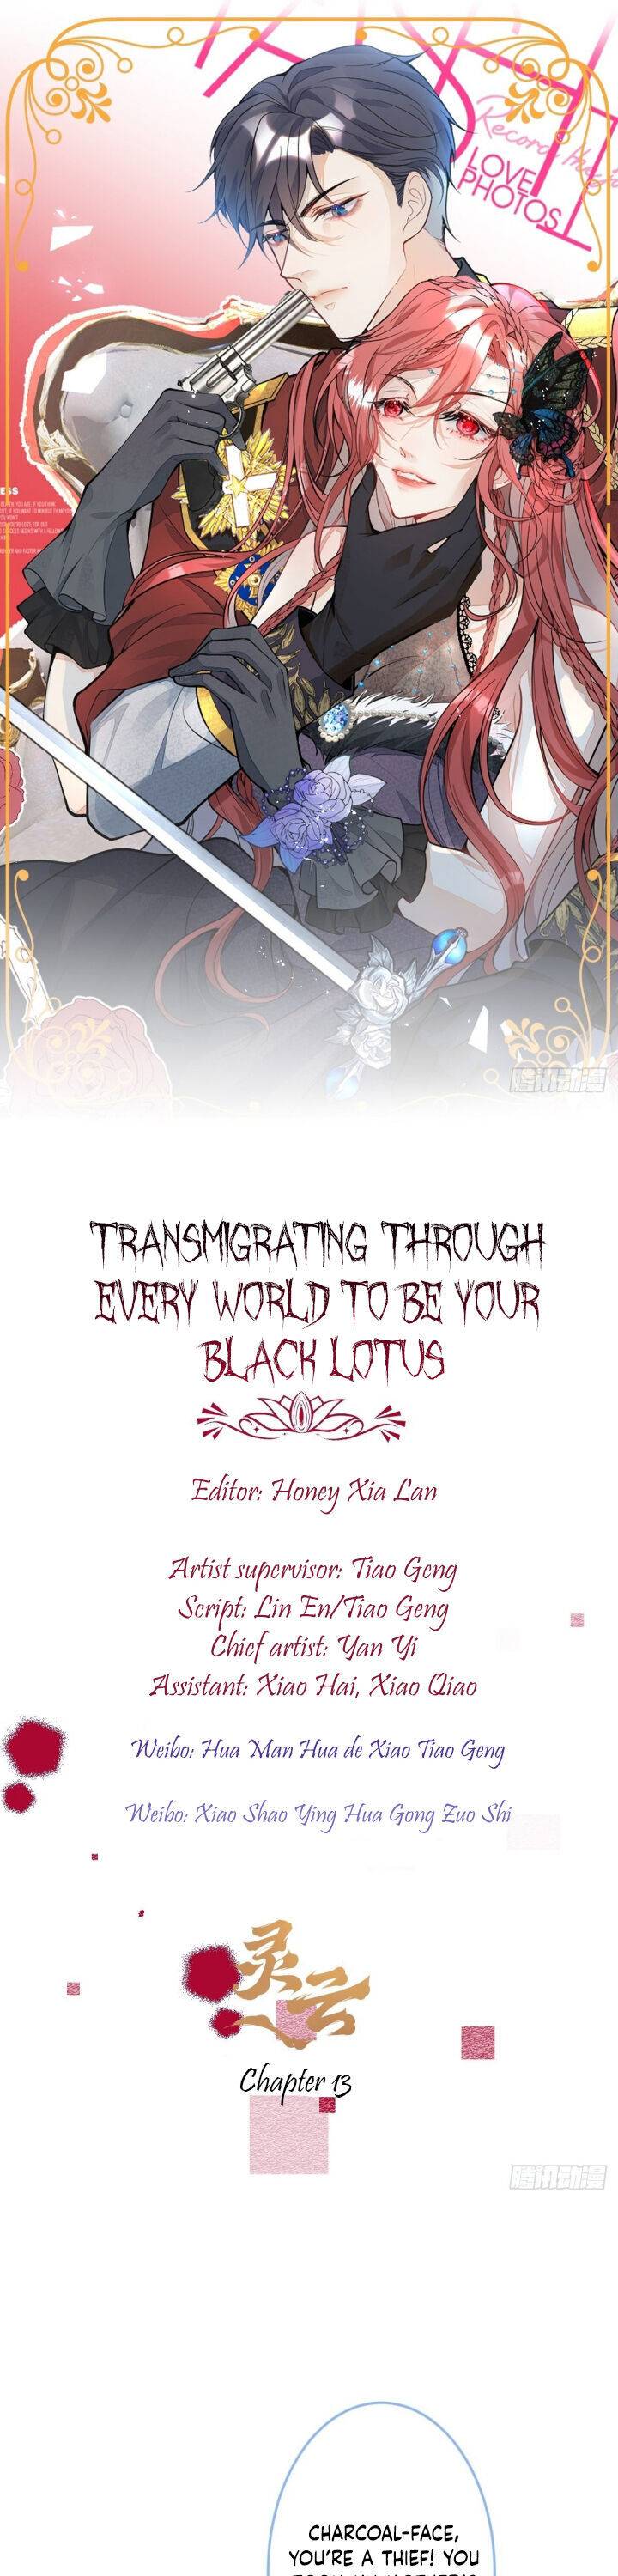 Transmigrating Through Every World to Be Your Black Lotus Chapter 13 - Page 0